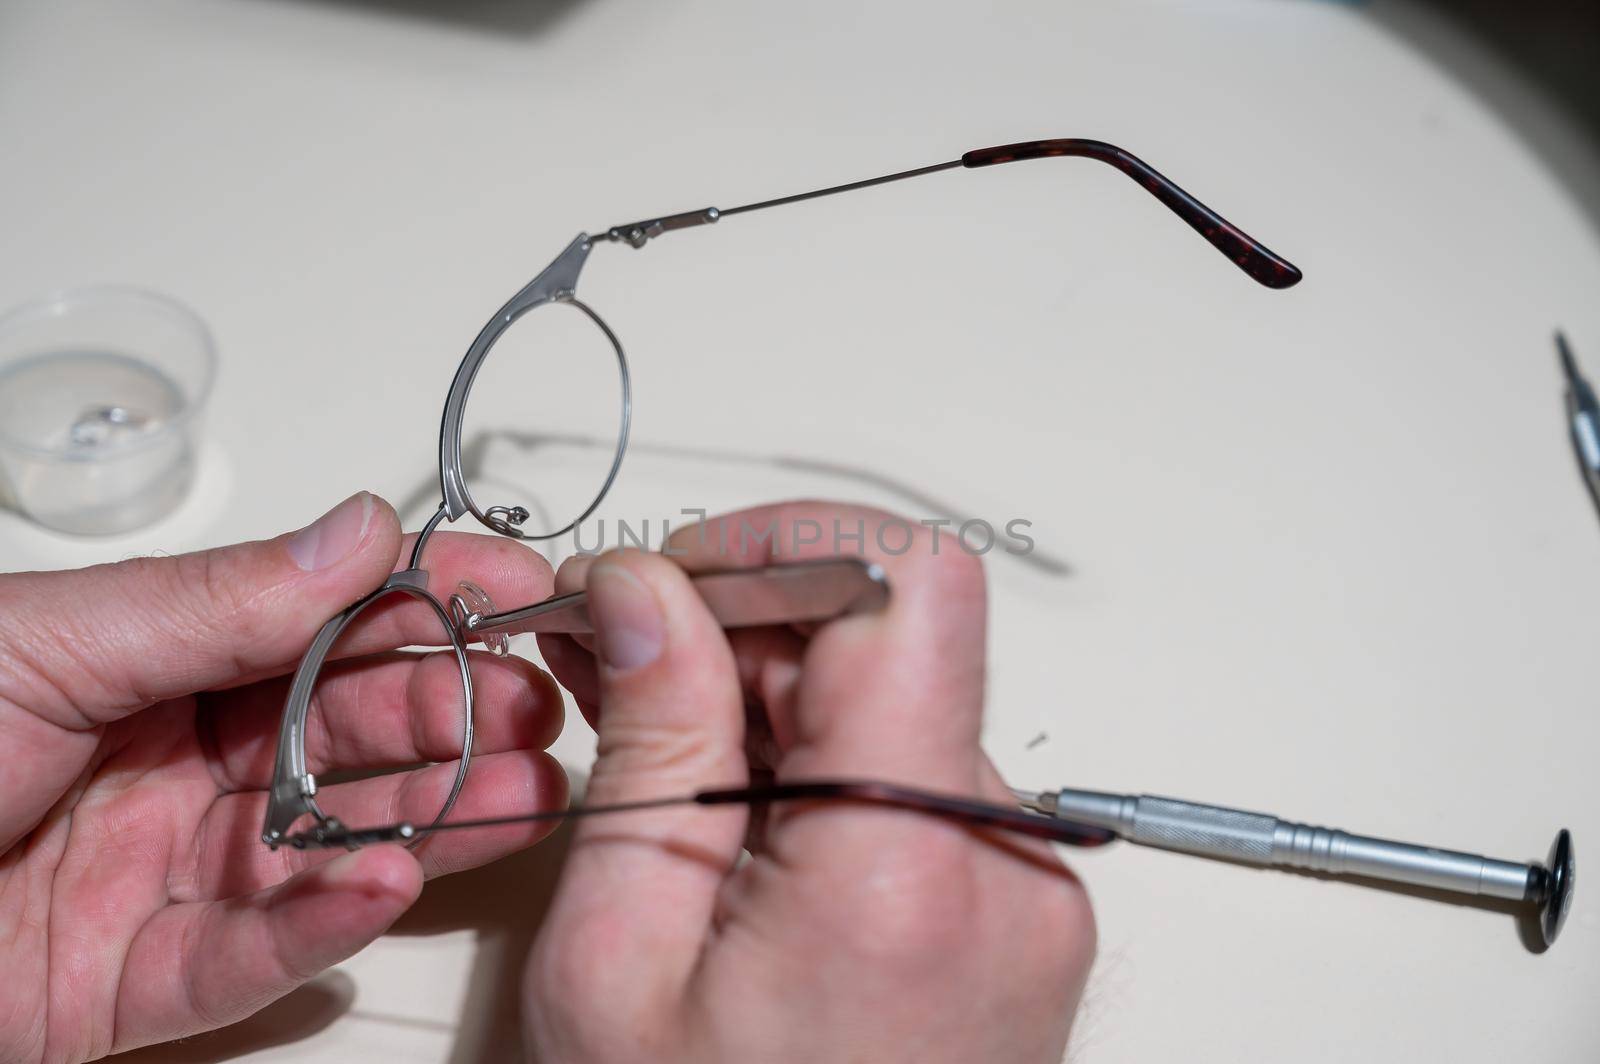 Installation of nose pads in glasses. A male technician repairs broken glasses by mrwed54